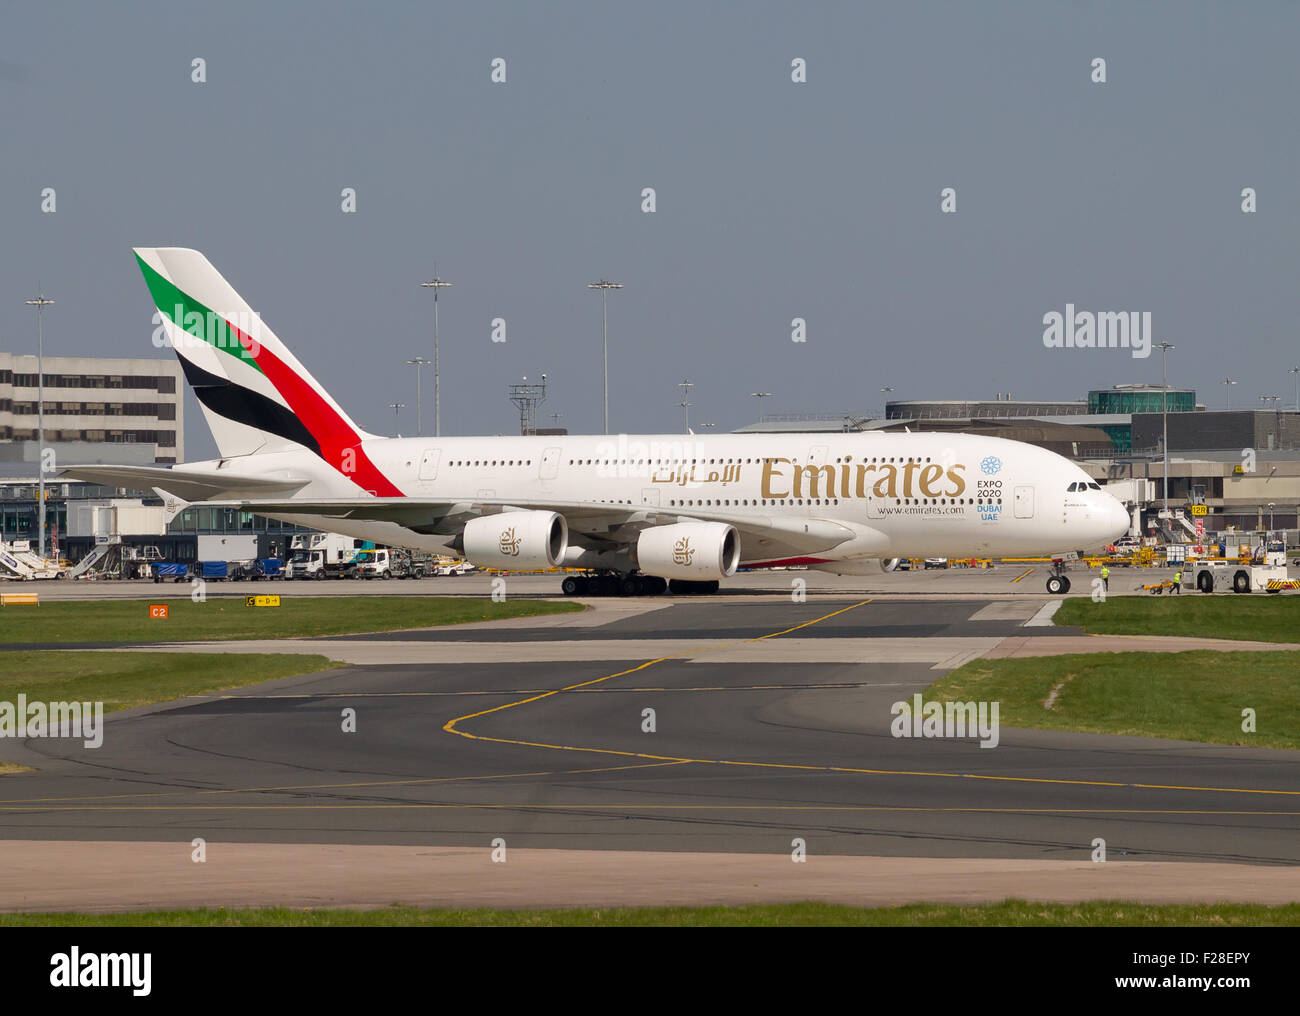 Emirates Airbus A380 double-decker passenger plane taxiing on Manchester Airport taxiway. Stock Photo